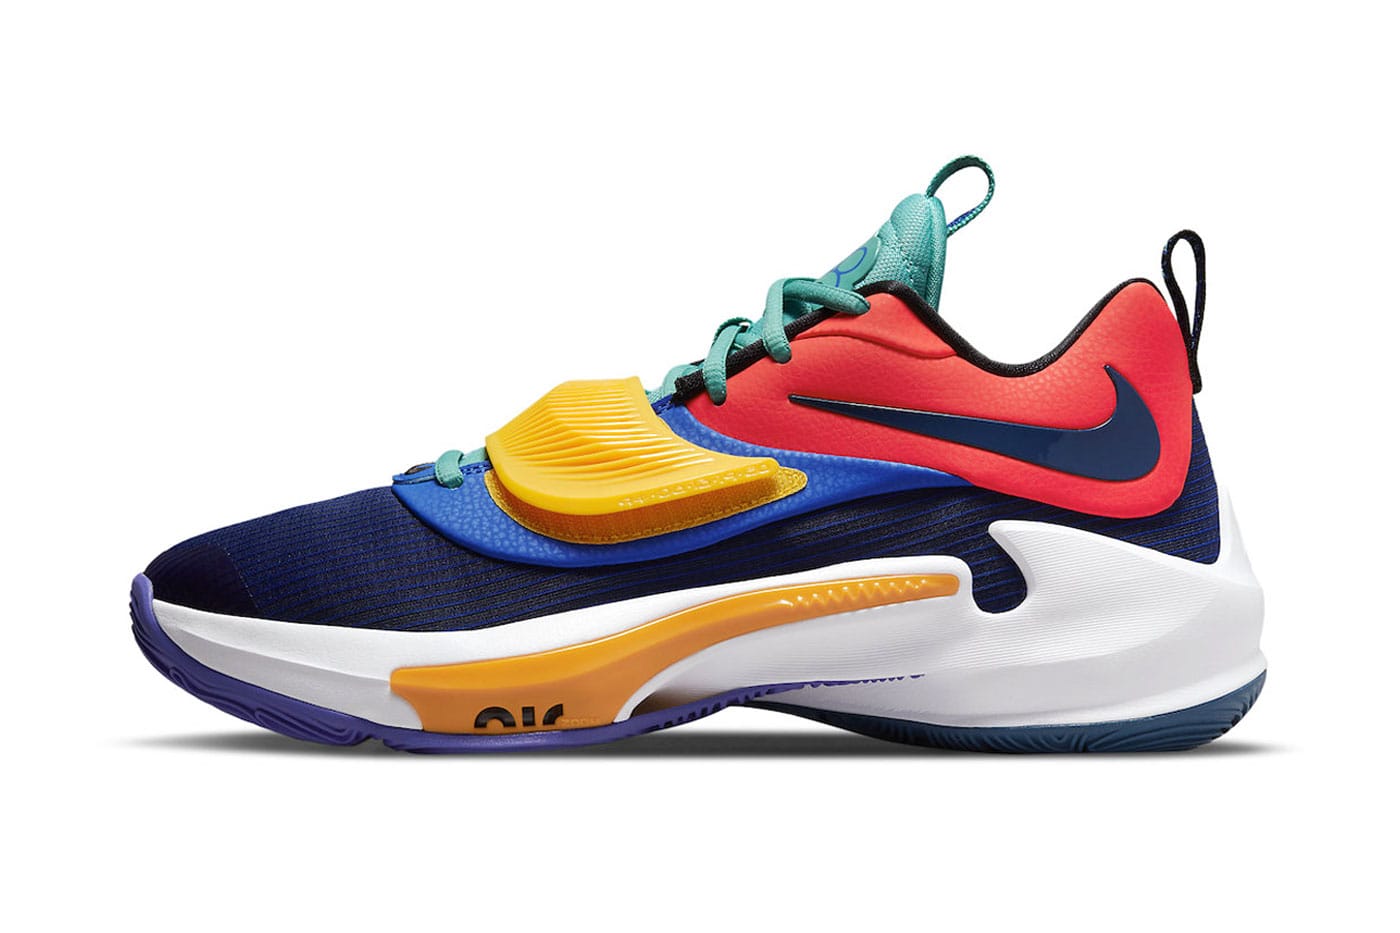 Official Images of the Nike Zoom Freak 3 